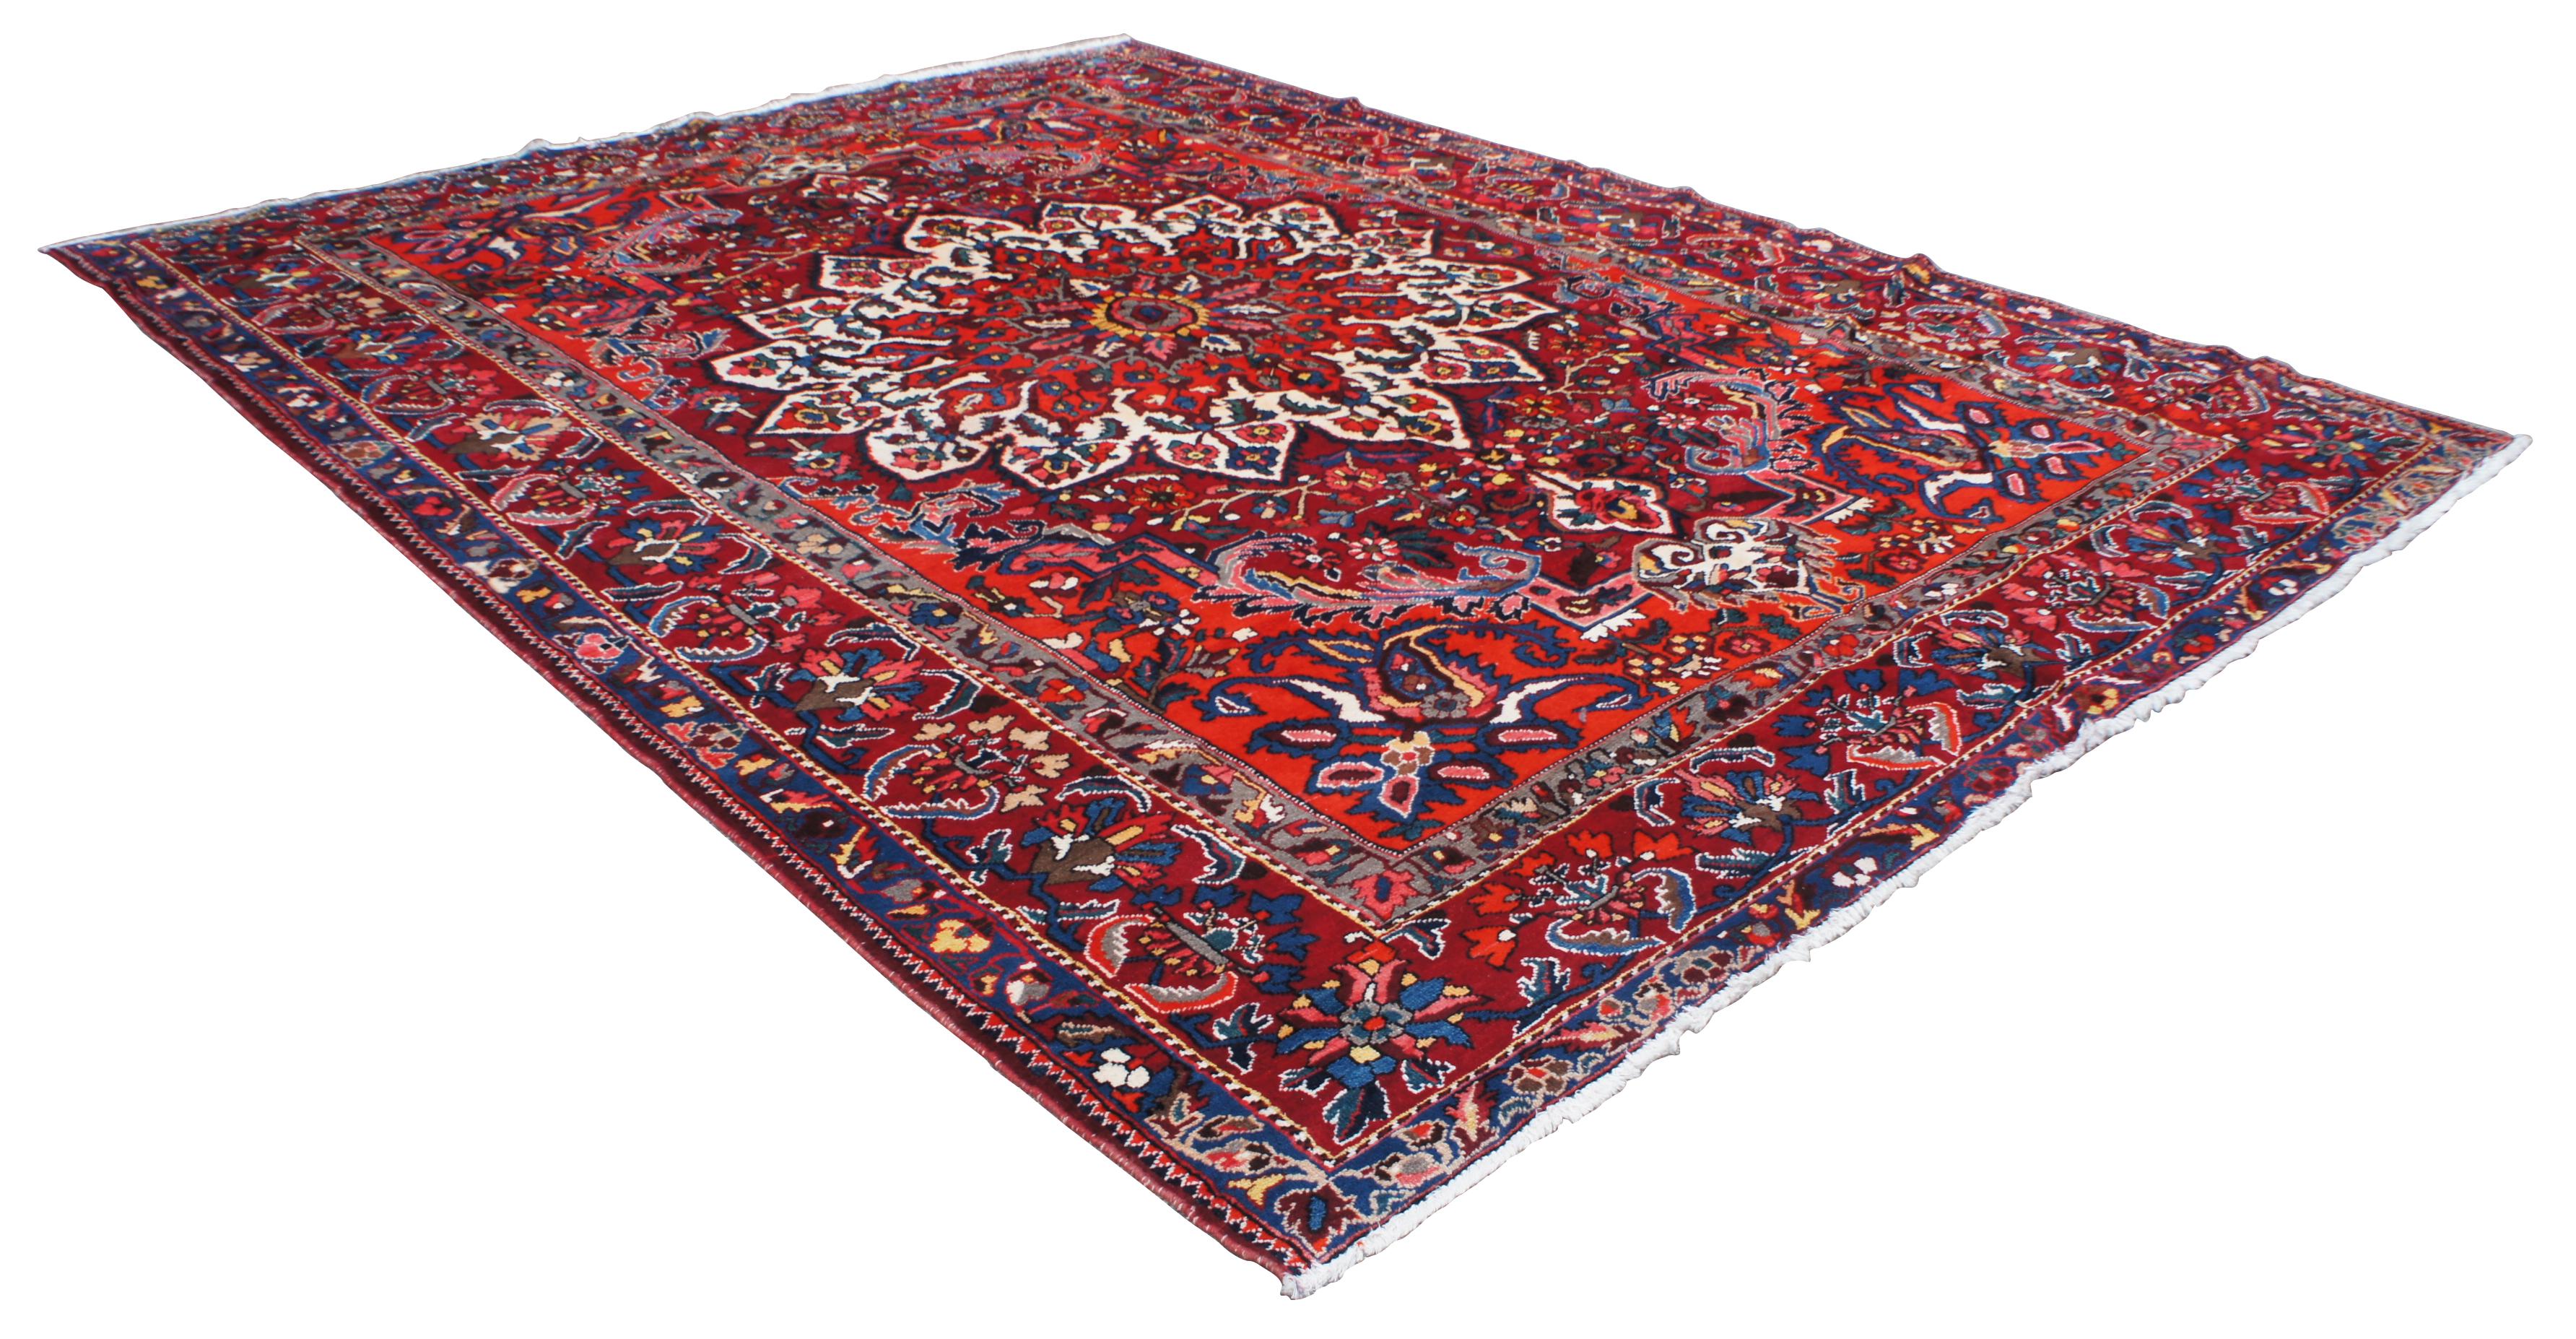 Vintage Bakhtiar Isfahan 100% Wool Floral All-Over Medallion Area Rug Carpet In Good Condition For Sale In Dayton, OH